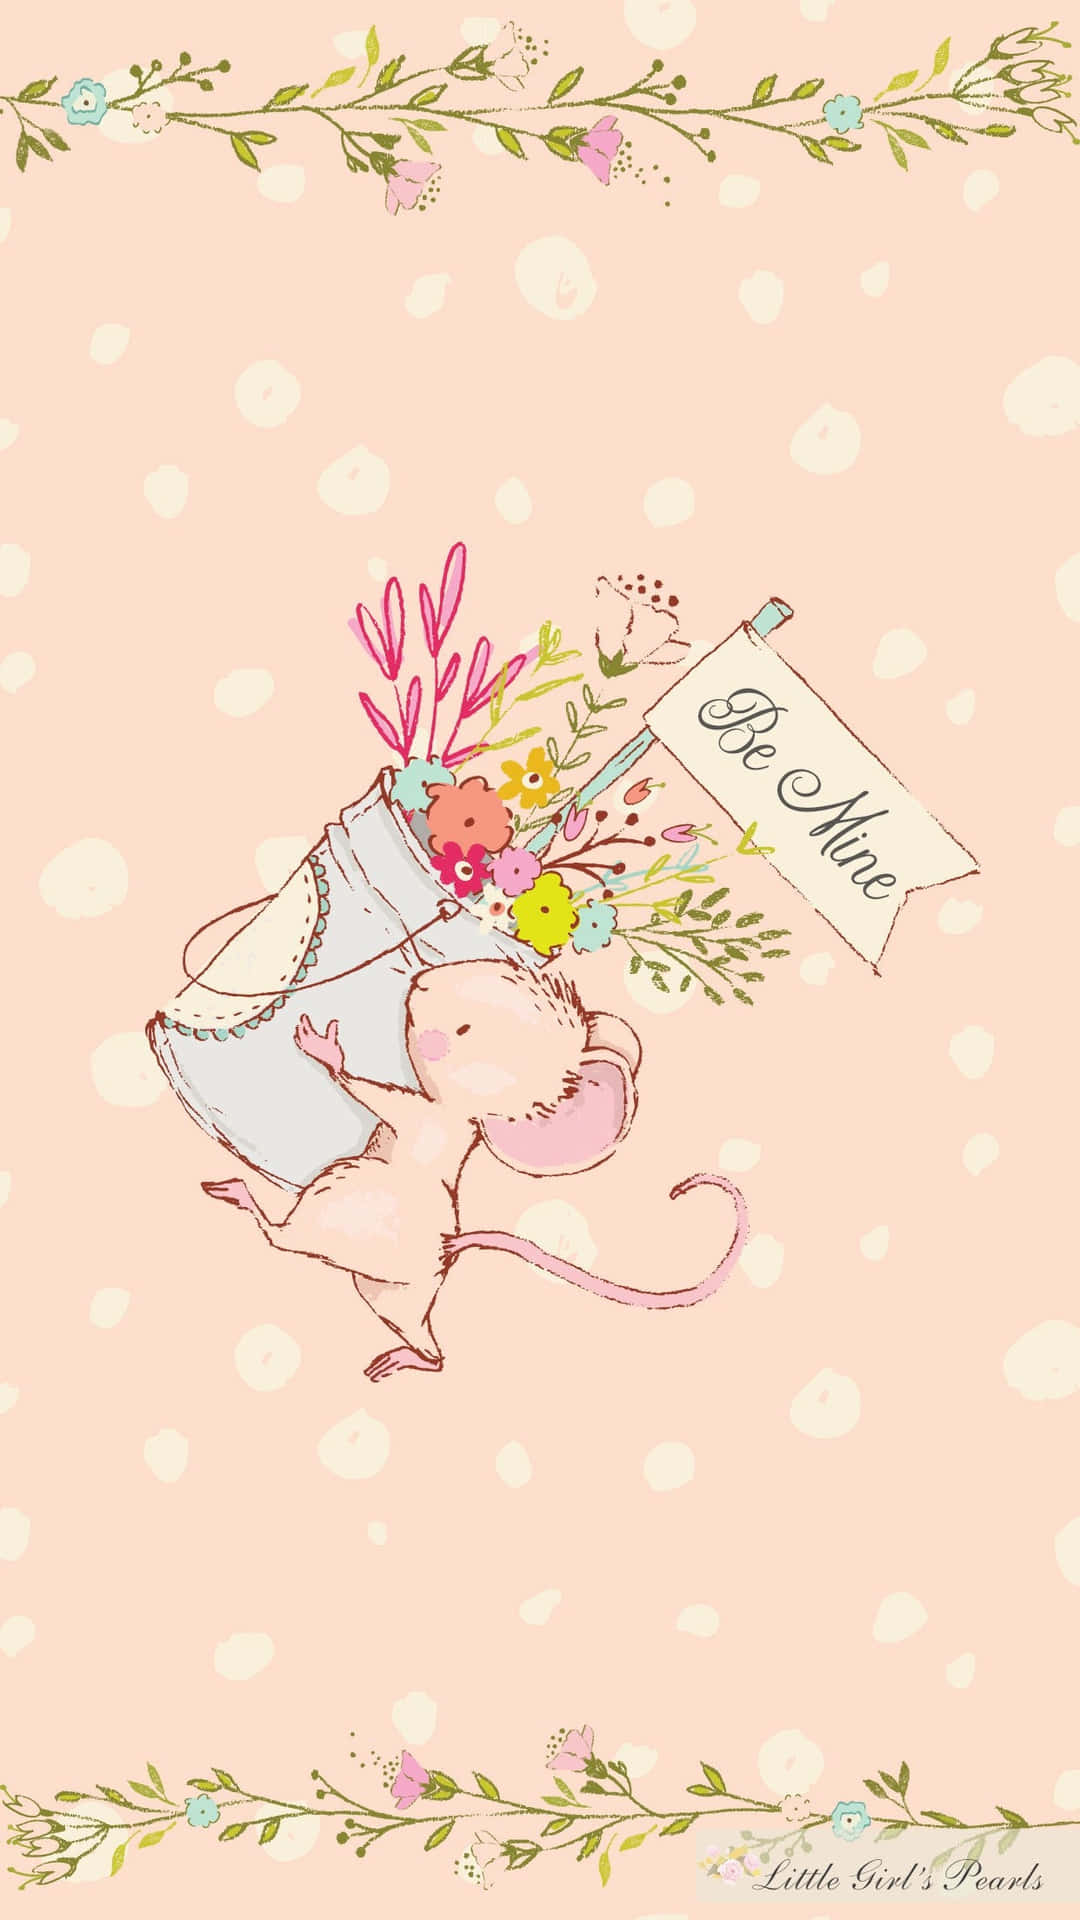 Customize your lock screen with this easily-downloadable girly image. Wallpaper